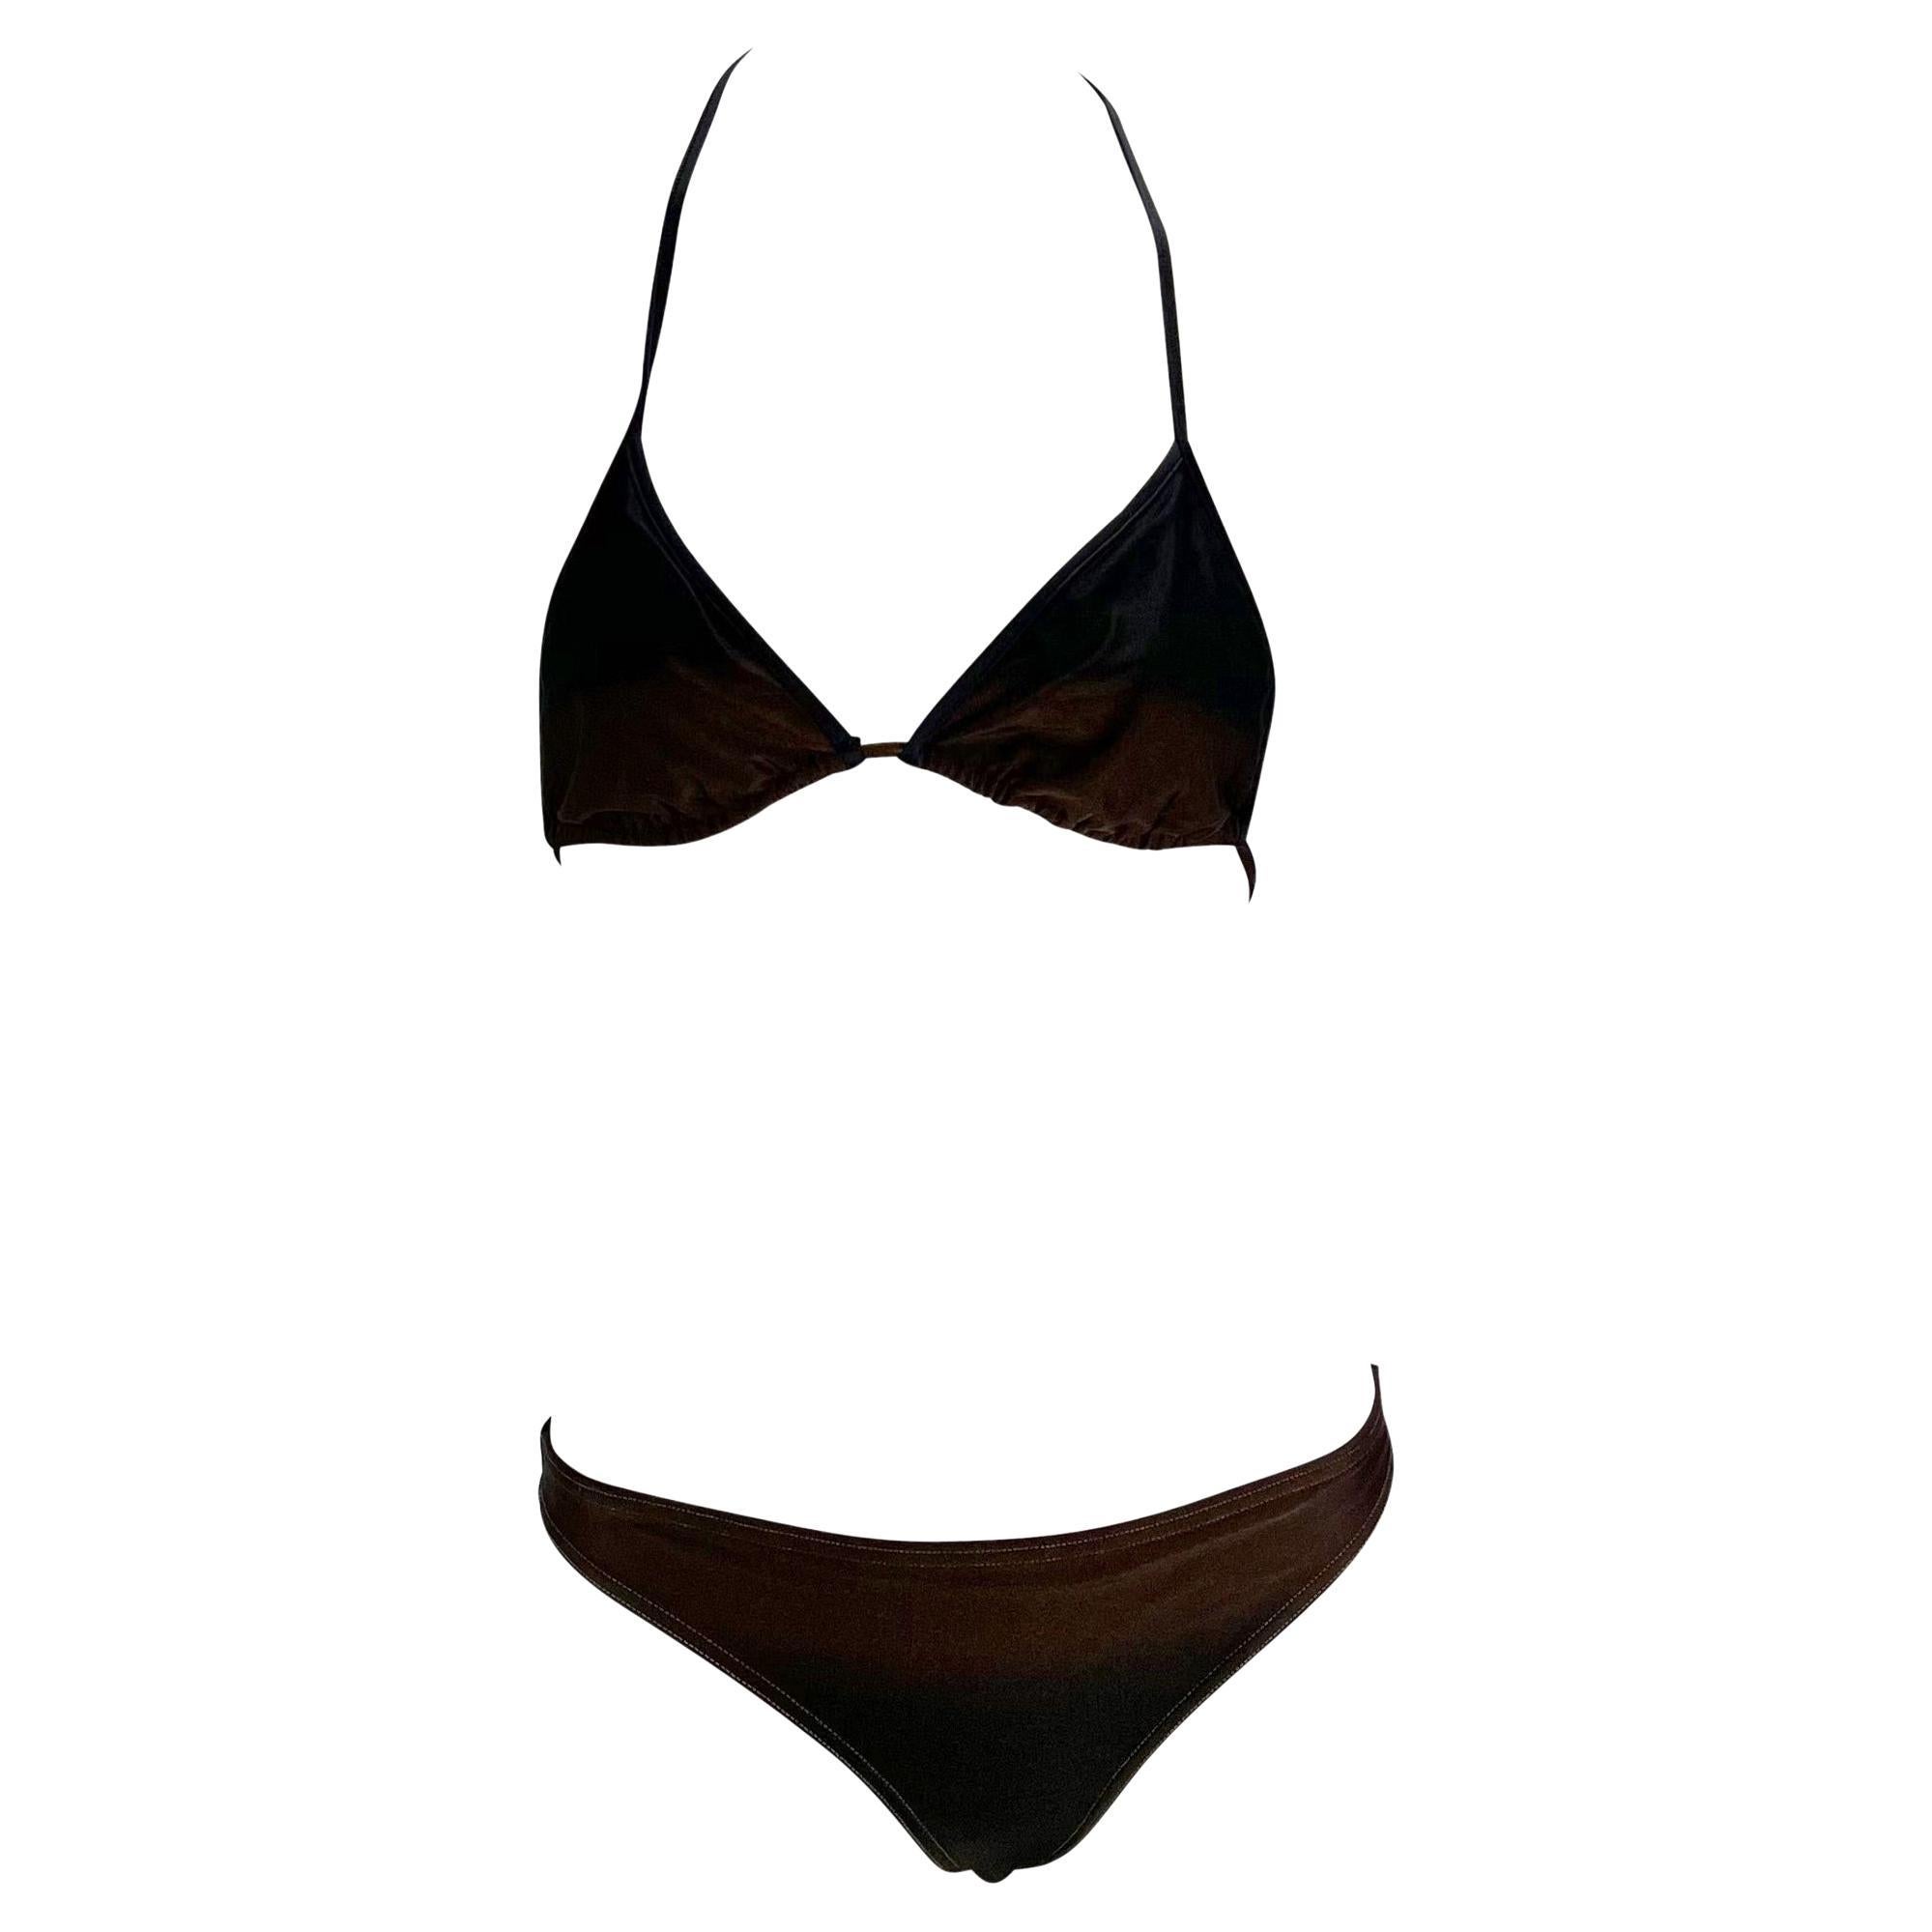 Presenting a gorgeous brown ombré Gucci bikini, designed by Tom Ford. From the Spring/Summer 1997 collection, these bikini bottoms debuted on the season's runway without the top. Both the top and bottom feature a black to brown ombré which was